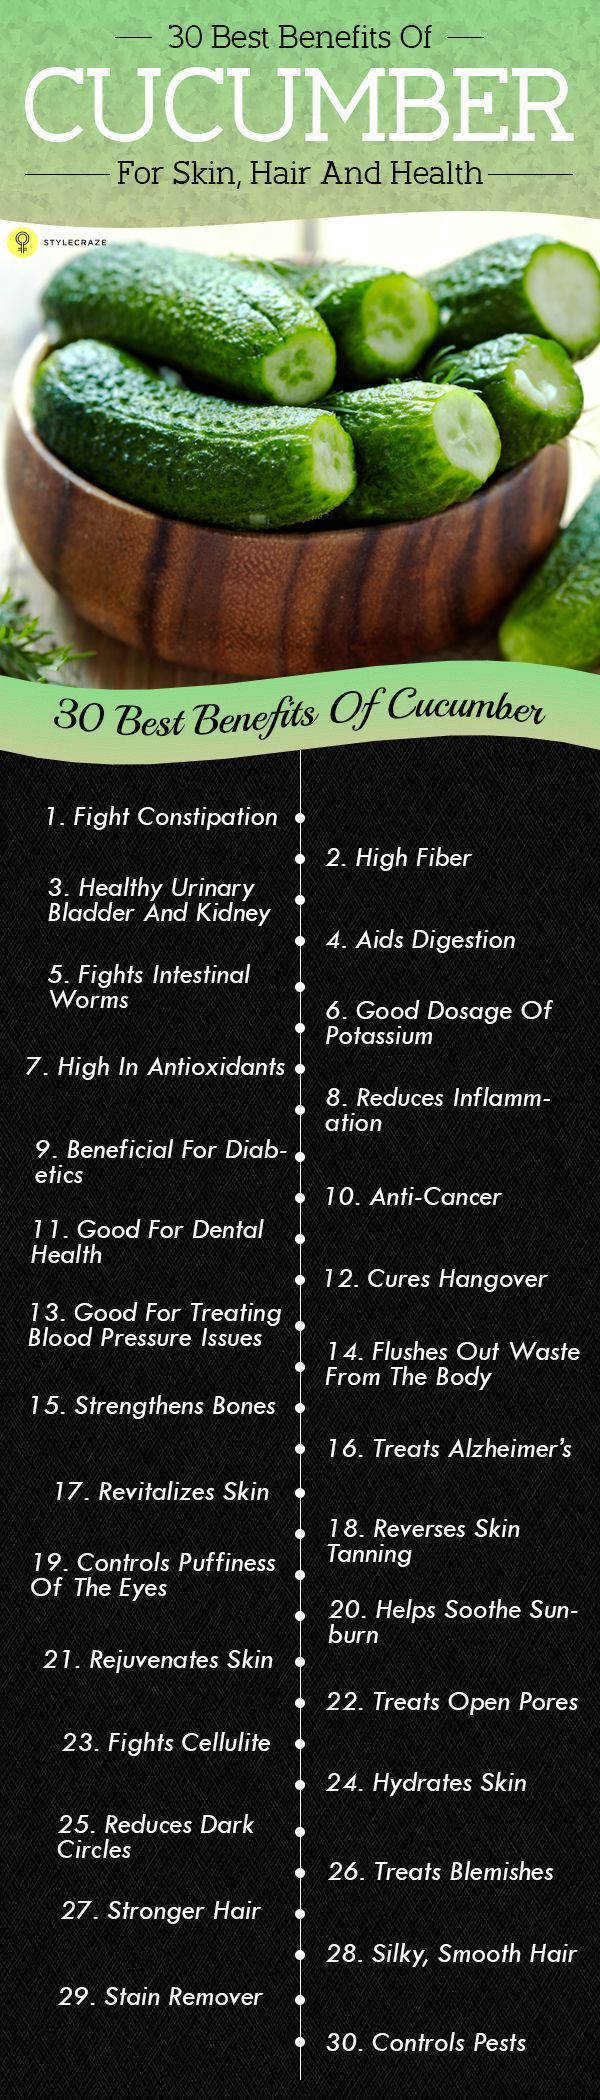 30 Skin, Hair And Health Benefits Of Cucumber Infographic